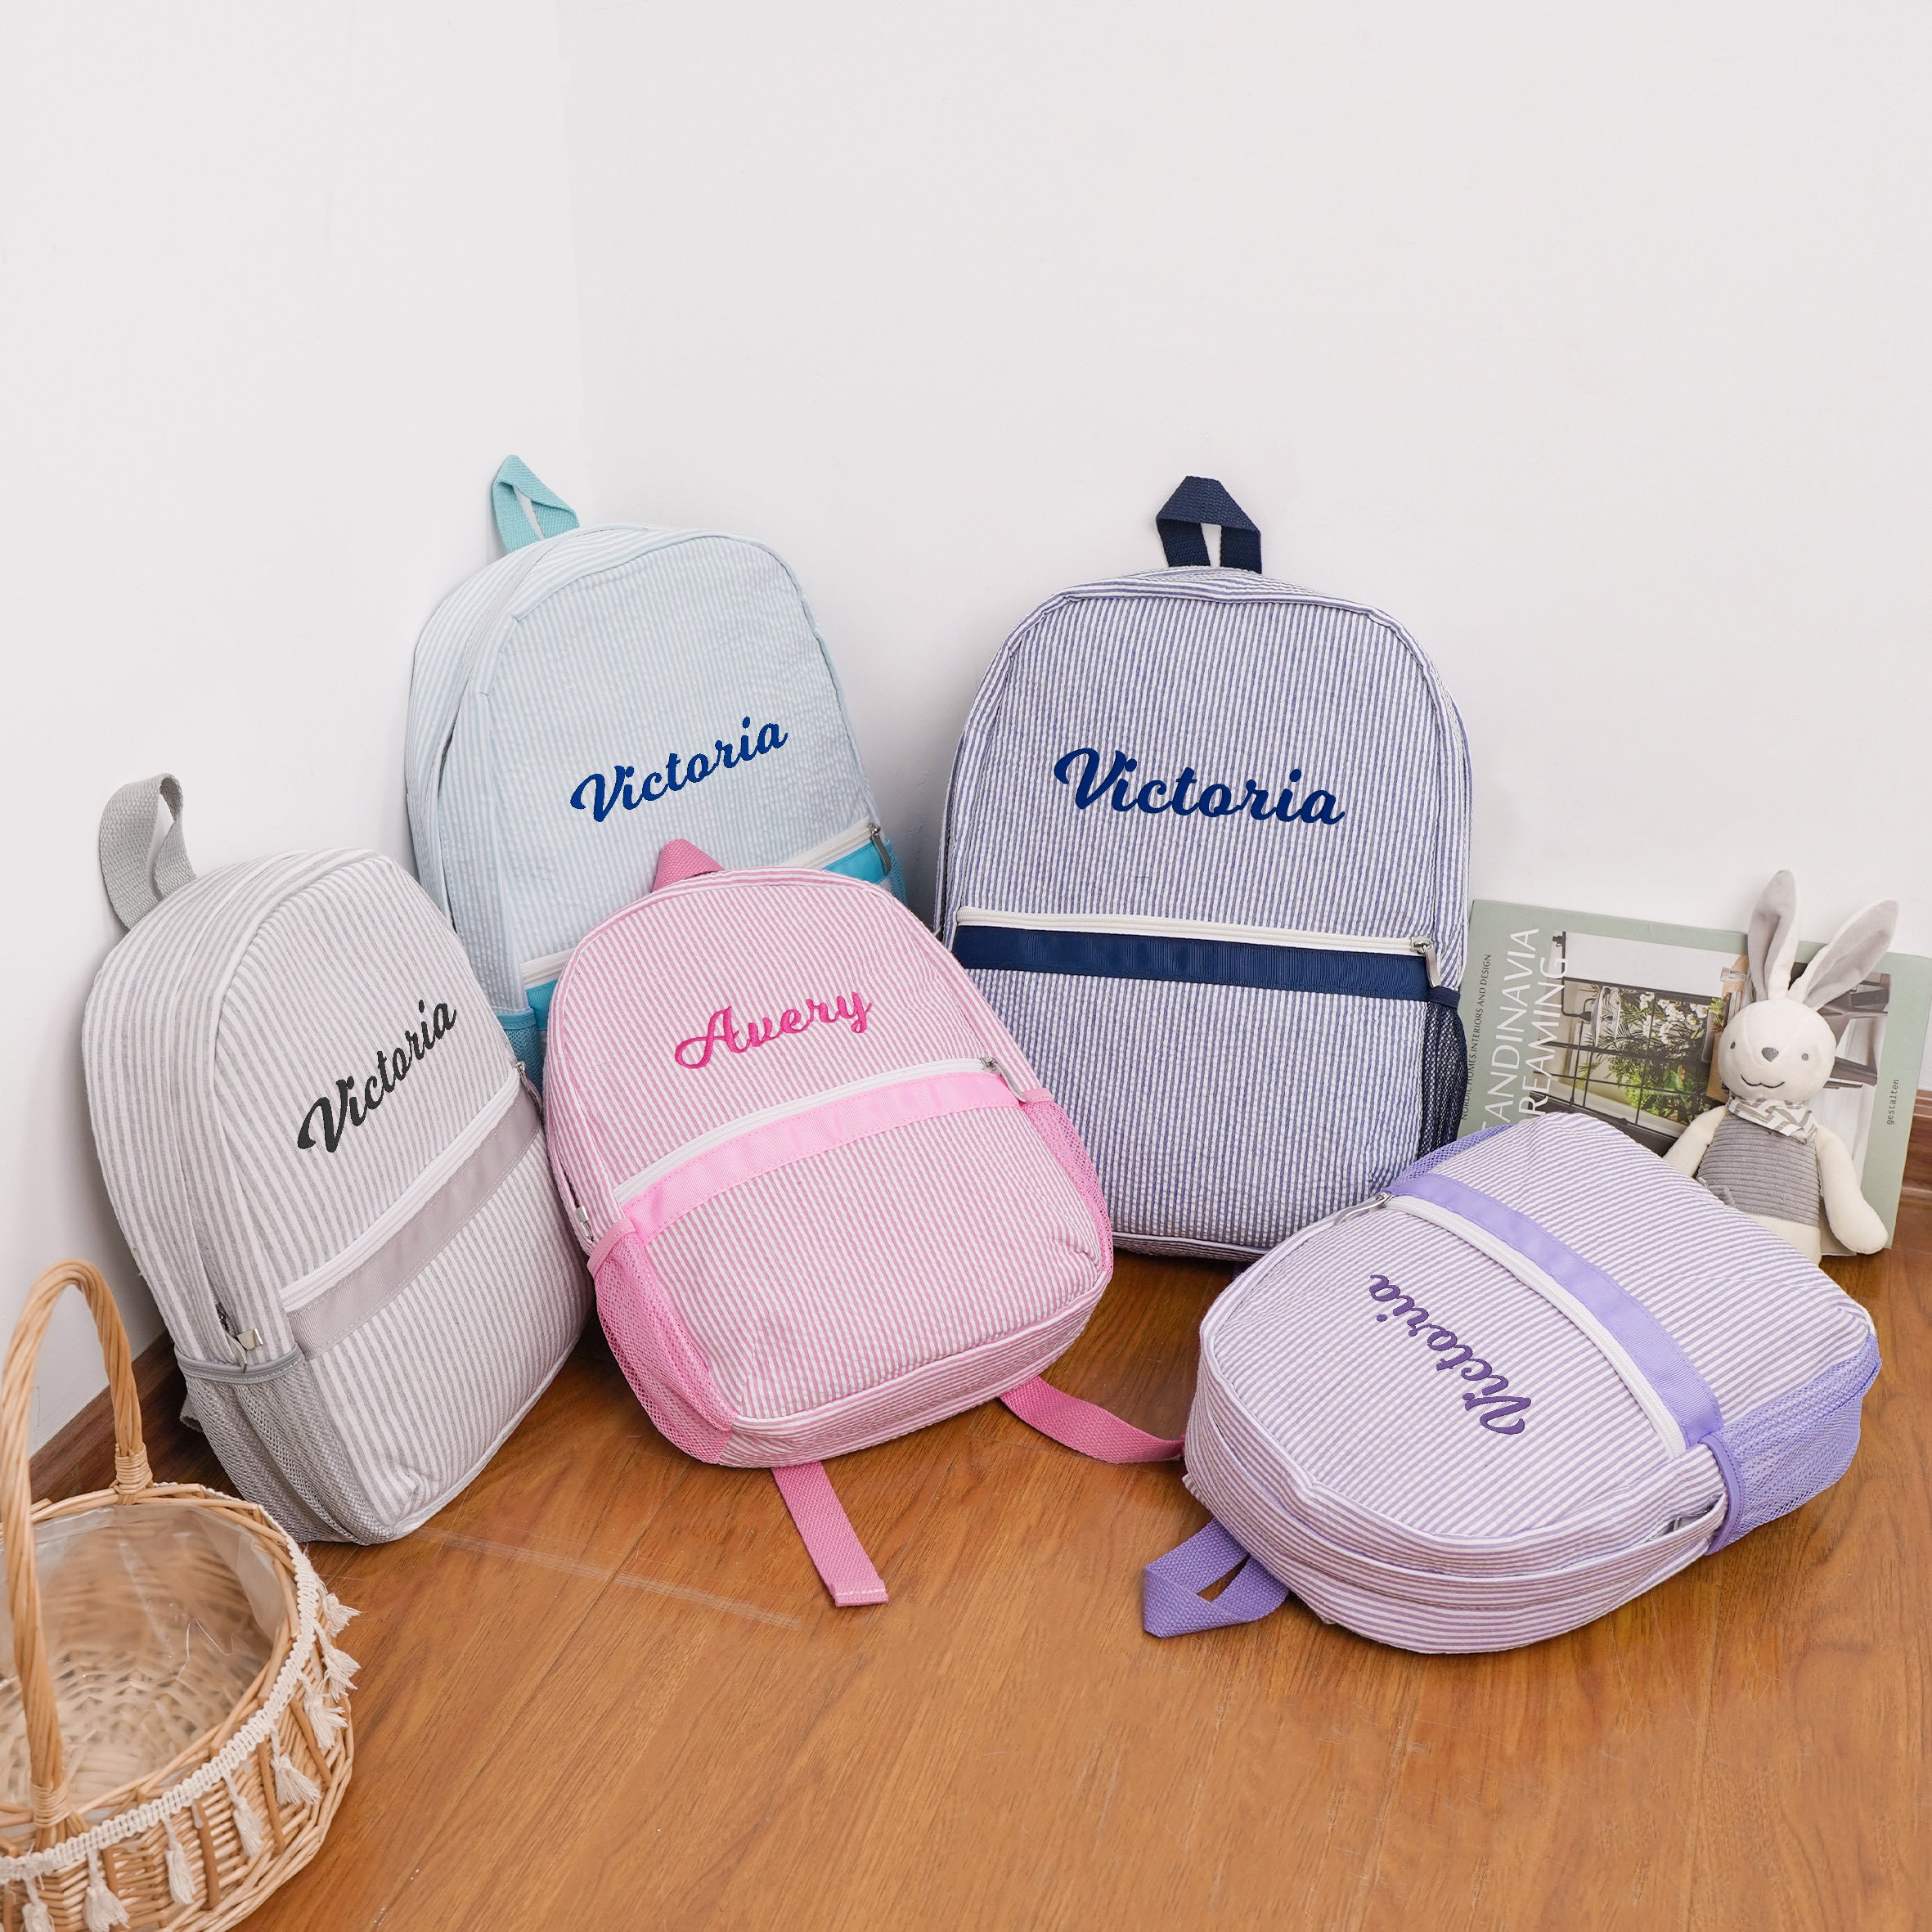  Custom Initial Name Backpack Bag for Boys Girls, Personalized  Colorful Glitter Sparkle Drip Monogram Schoolbag Casual Backpack Customized  Bookbag for Kids Unisex Back School Camping Hiking Travel